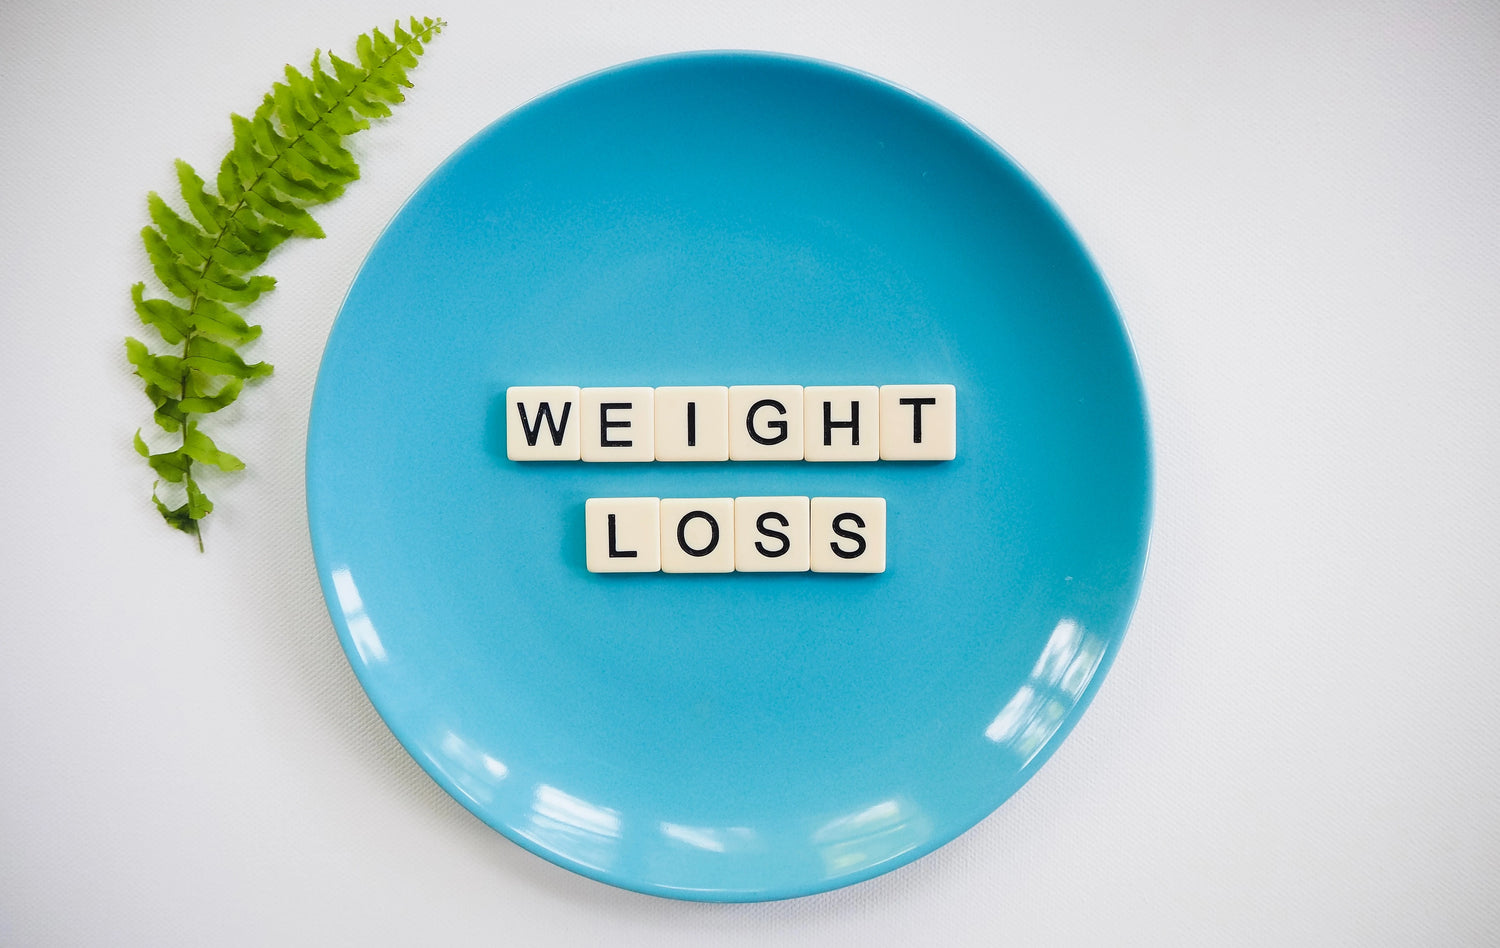 Empty blue plate with scrabble letters spelling weight loss.